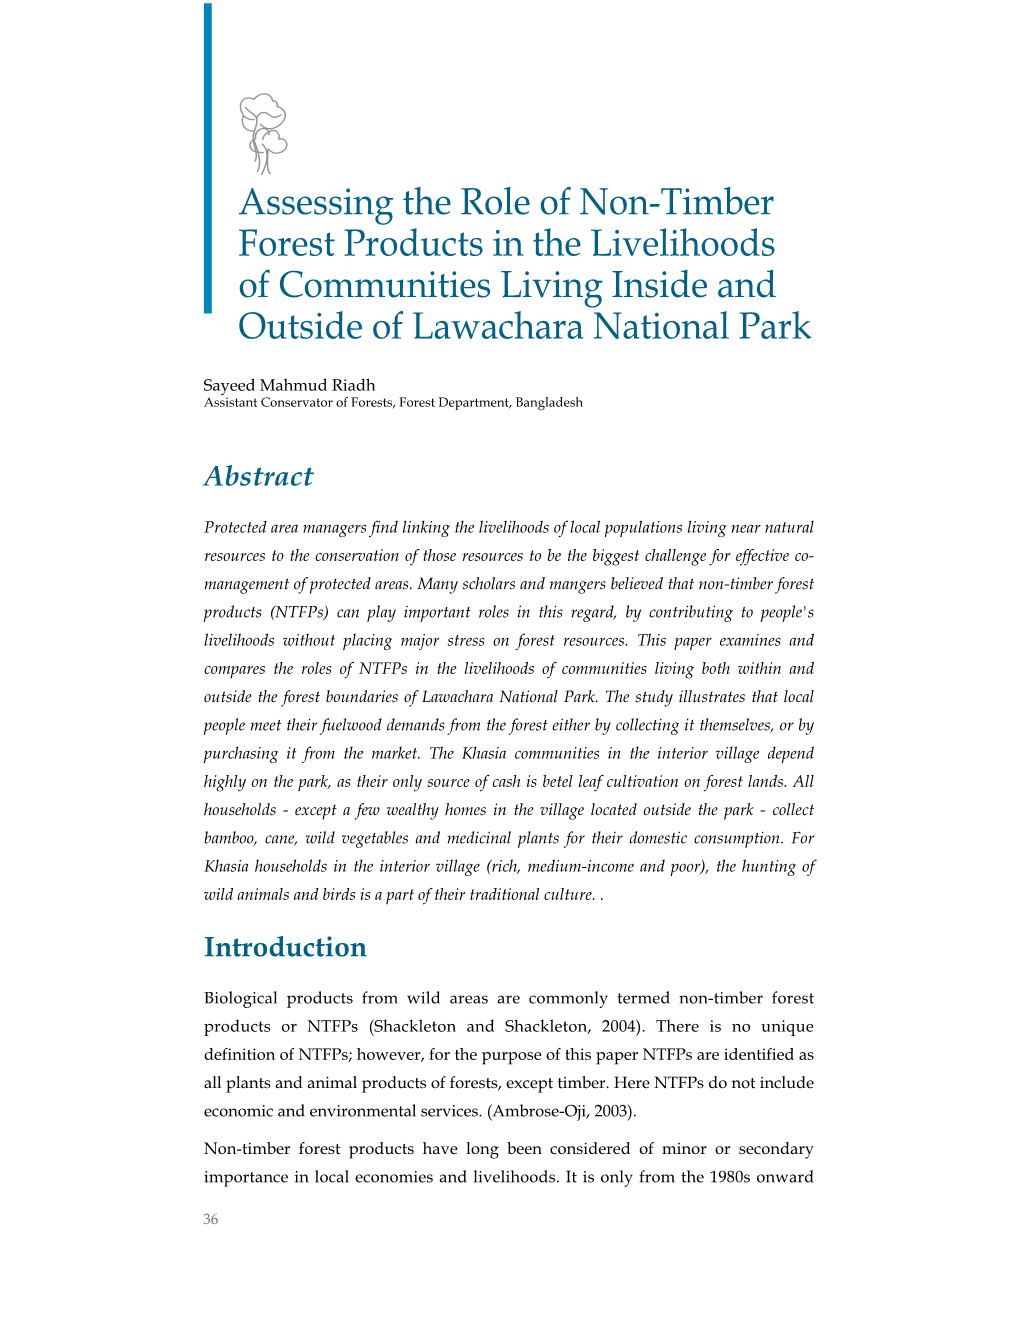 Assessing the Role of Non-Timber Forest Products in the Livelihoods of Communities Living Inside and Outside of Lawachara National Park